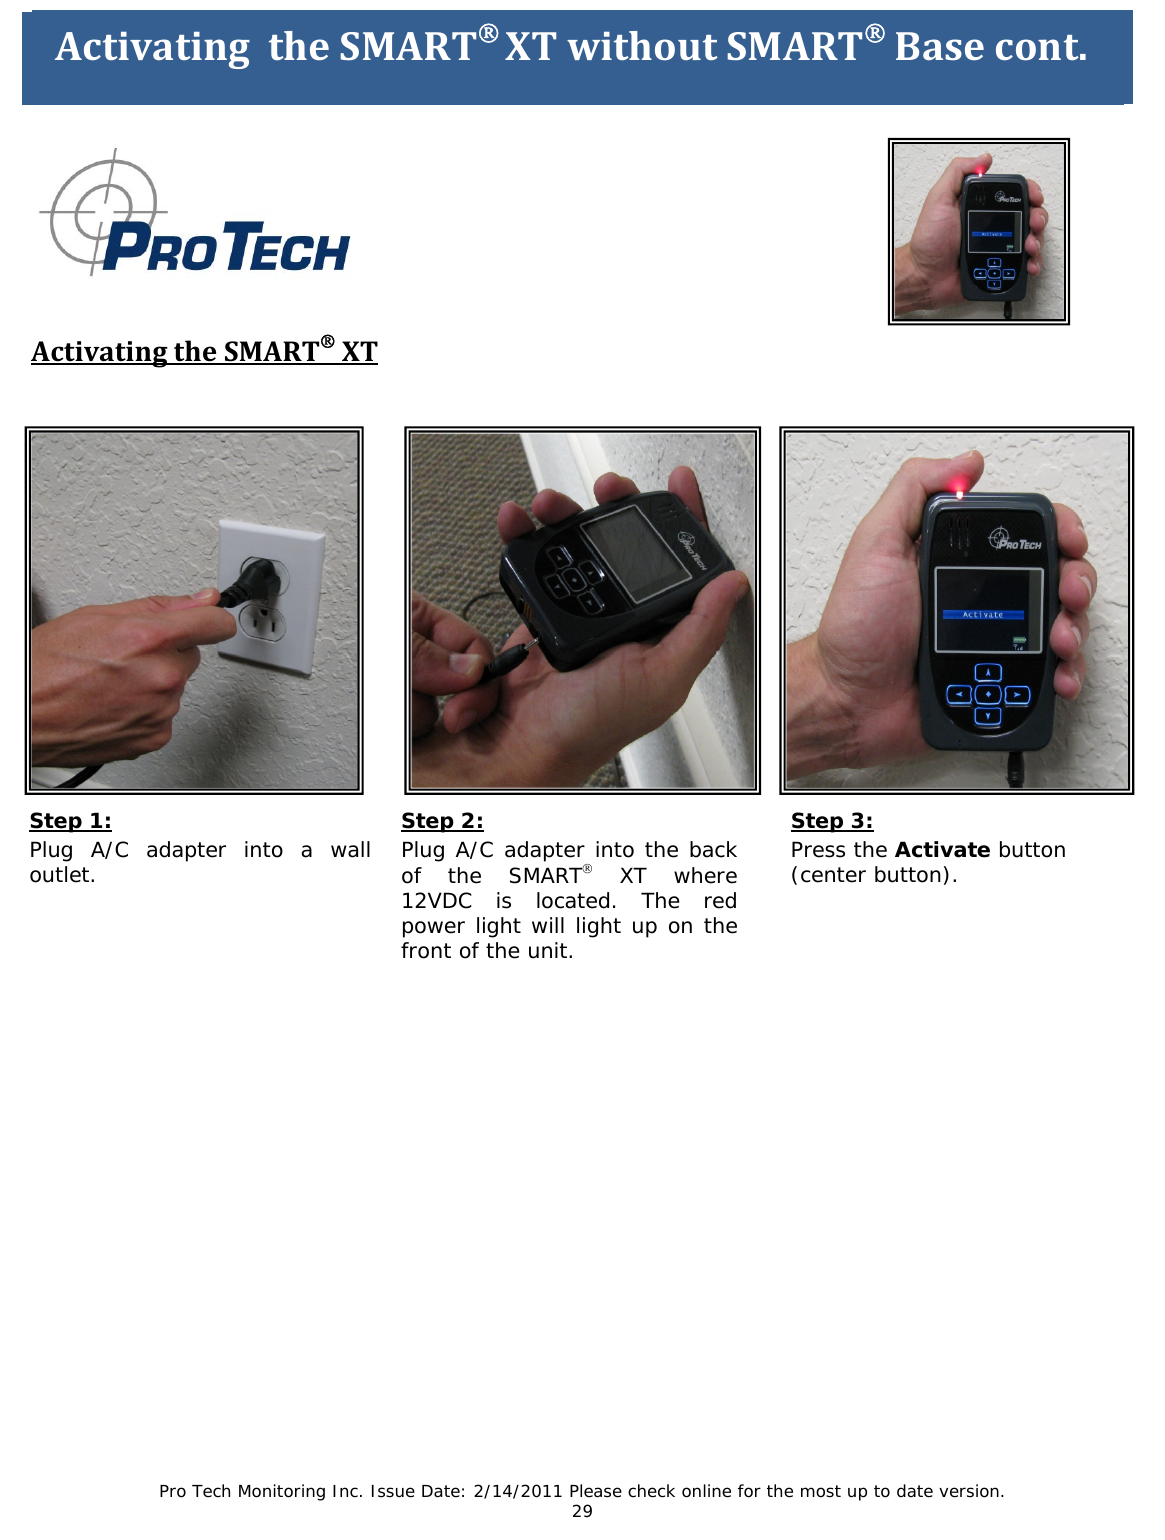 Pro Tech Monitoring Inc. Issue Date: 2/14/2011 Please check online for the most up to date version. 29                  ActivatingtheSMART®XTwithoutSMART®Base        ActivatingtheSMART®XTStep 1: Plug A/C adapter into a wall outlet.  ActivatingtheSMART®XTwithoutSMART®Basecont. Step 3: Press the Activate button (center button). Step 2: Plug A/C adapter into the back of the SMART® XT where 12VDC is located. The red power light will light up on the front of the unit.  